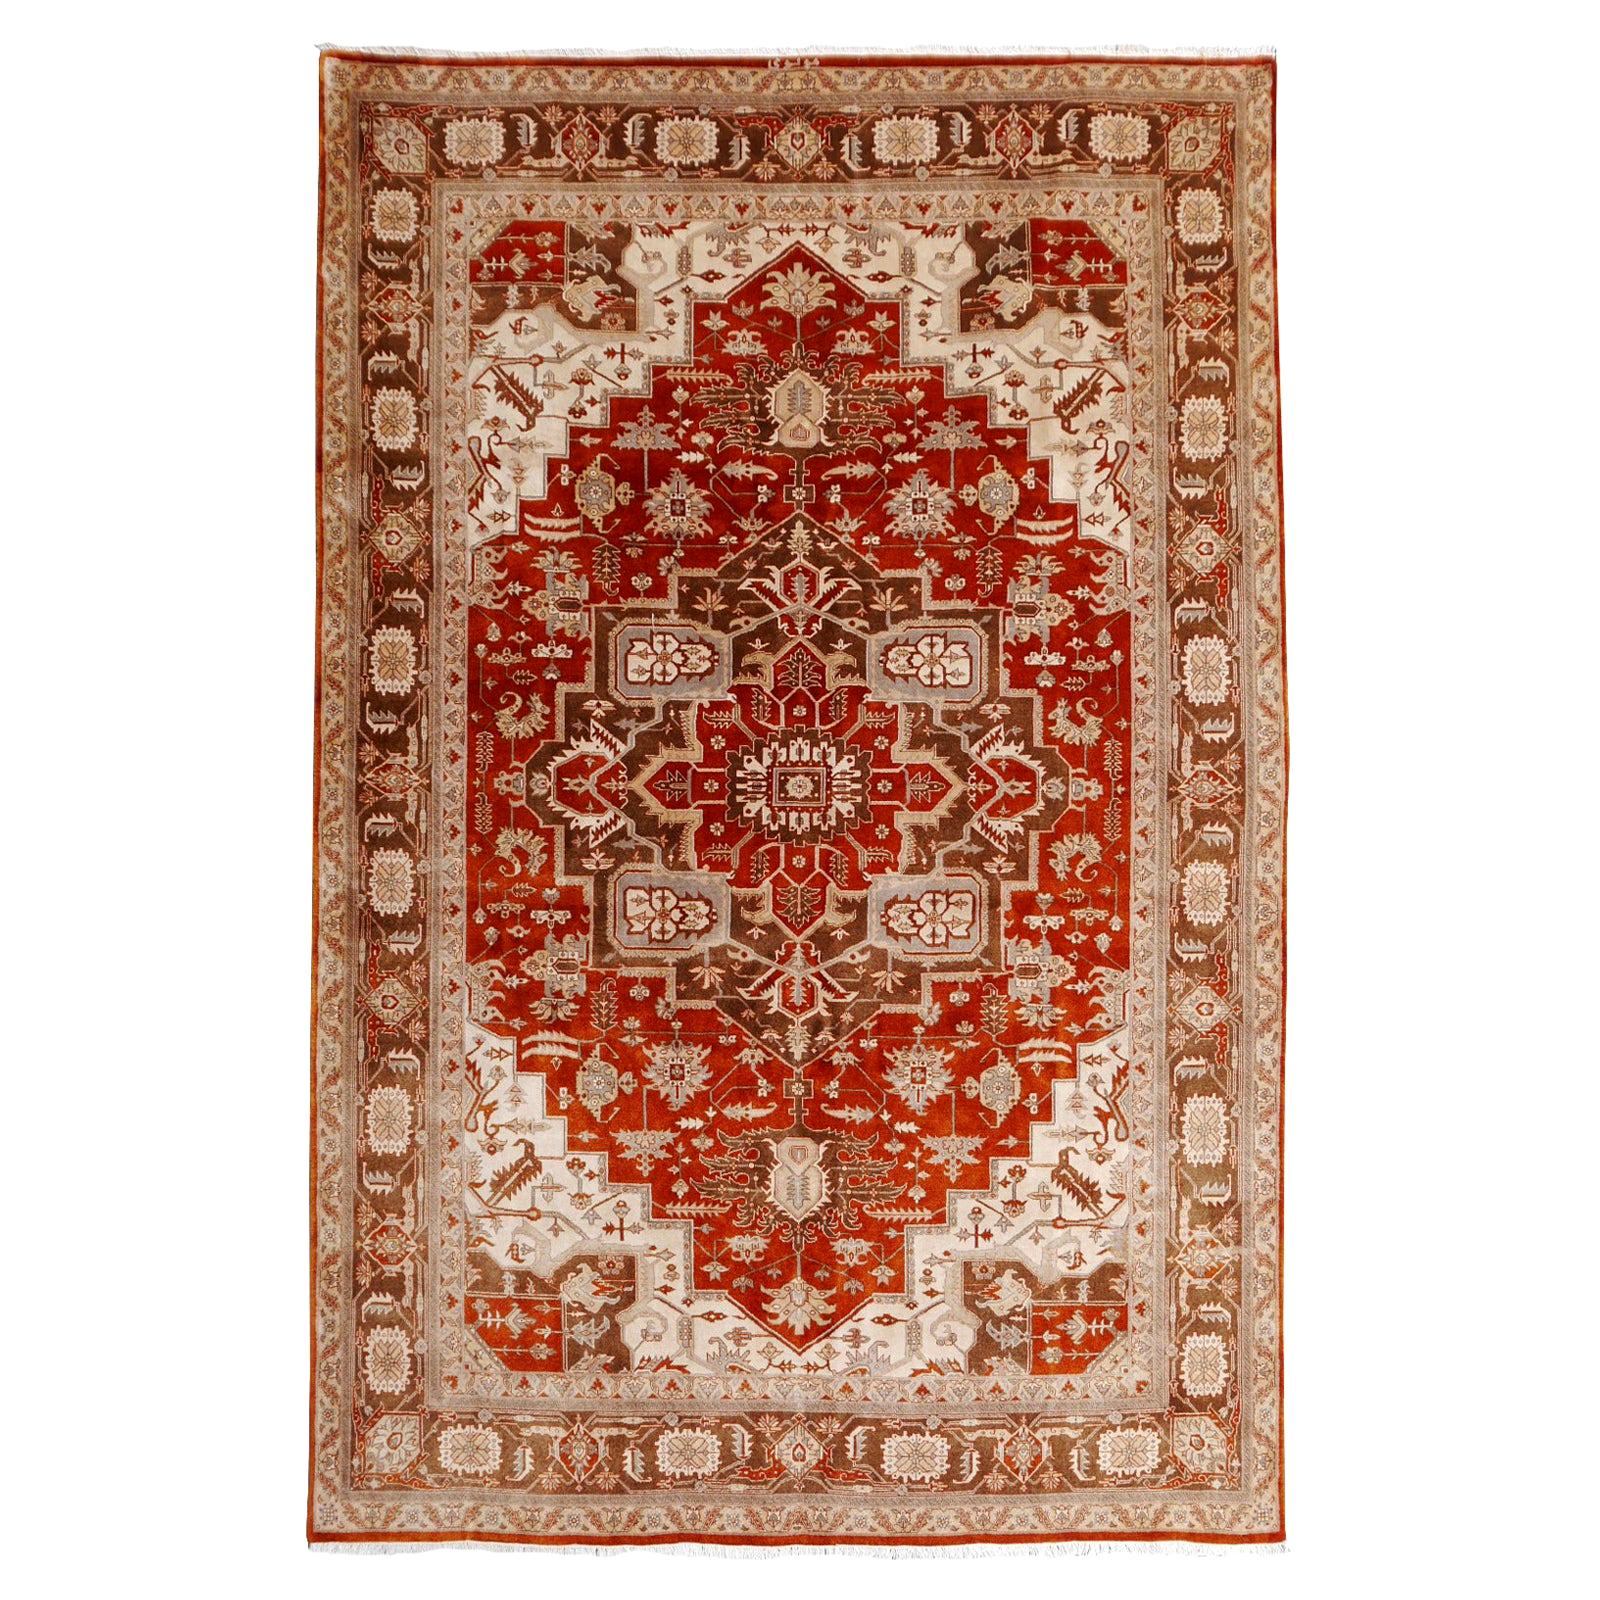 21st Century Modern Luxury Indian Rug with Herz Design Centemporary Colors